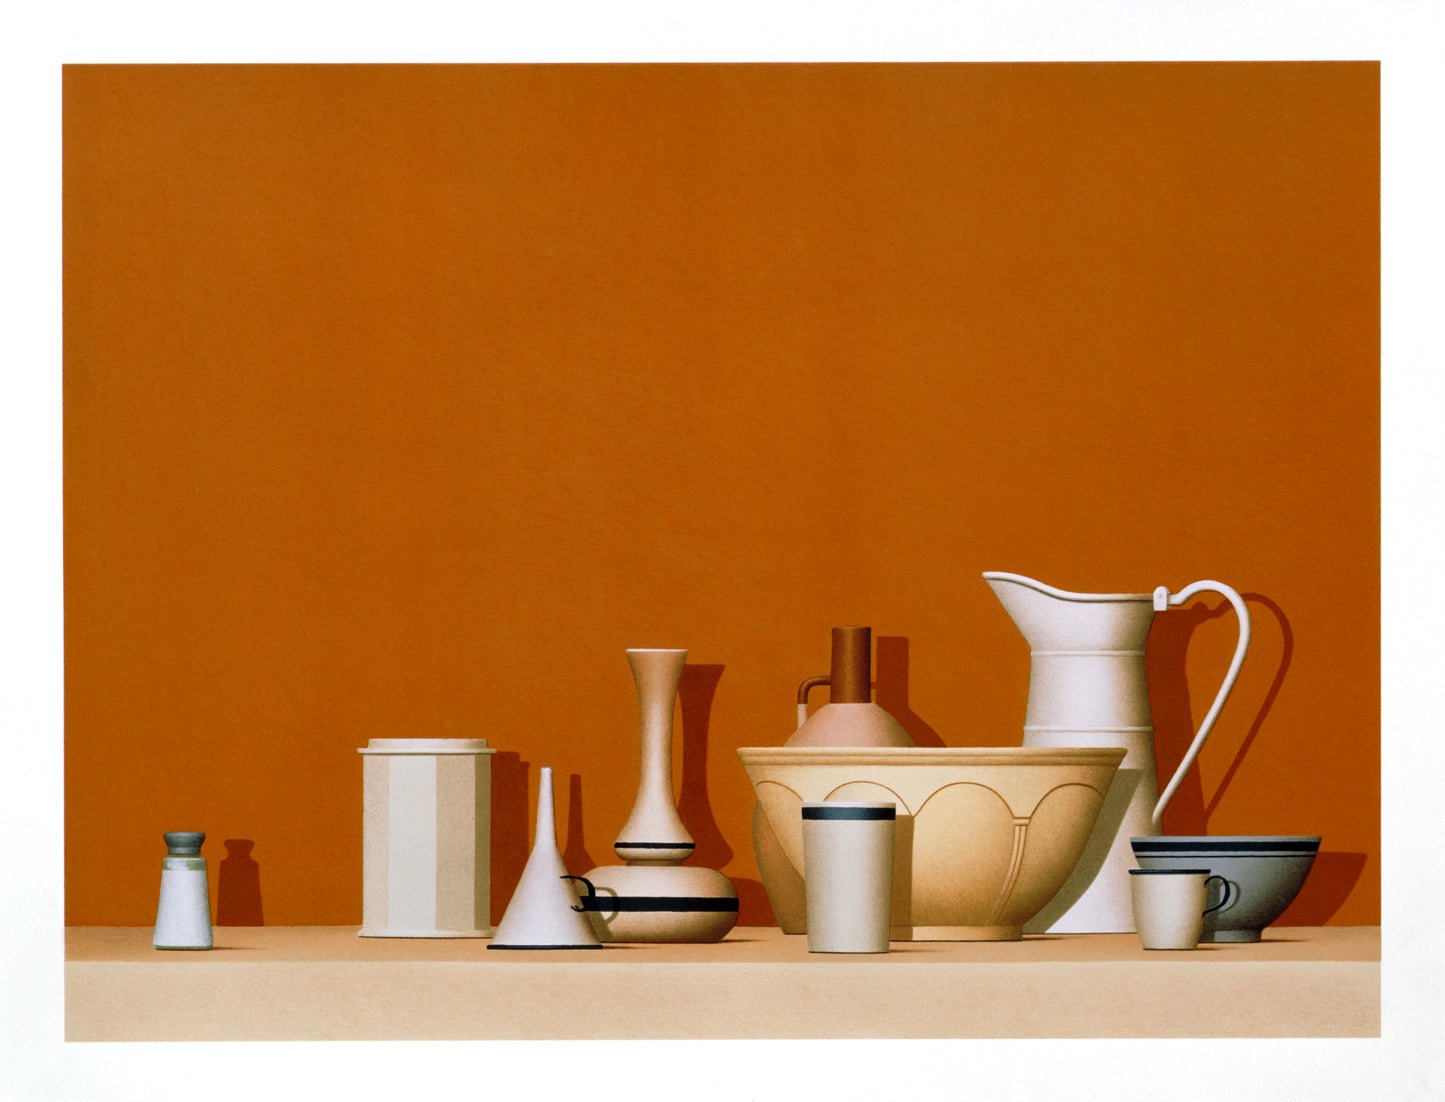 Soliloquy by William Bailey, a print depicting a minimalist still life arrangement of various ceramic pieces against a warm orange background. This composition includes a pitcher, bowls, vases, and jars in neutral tones of white, beige, and gray.  